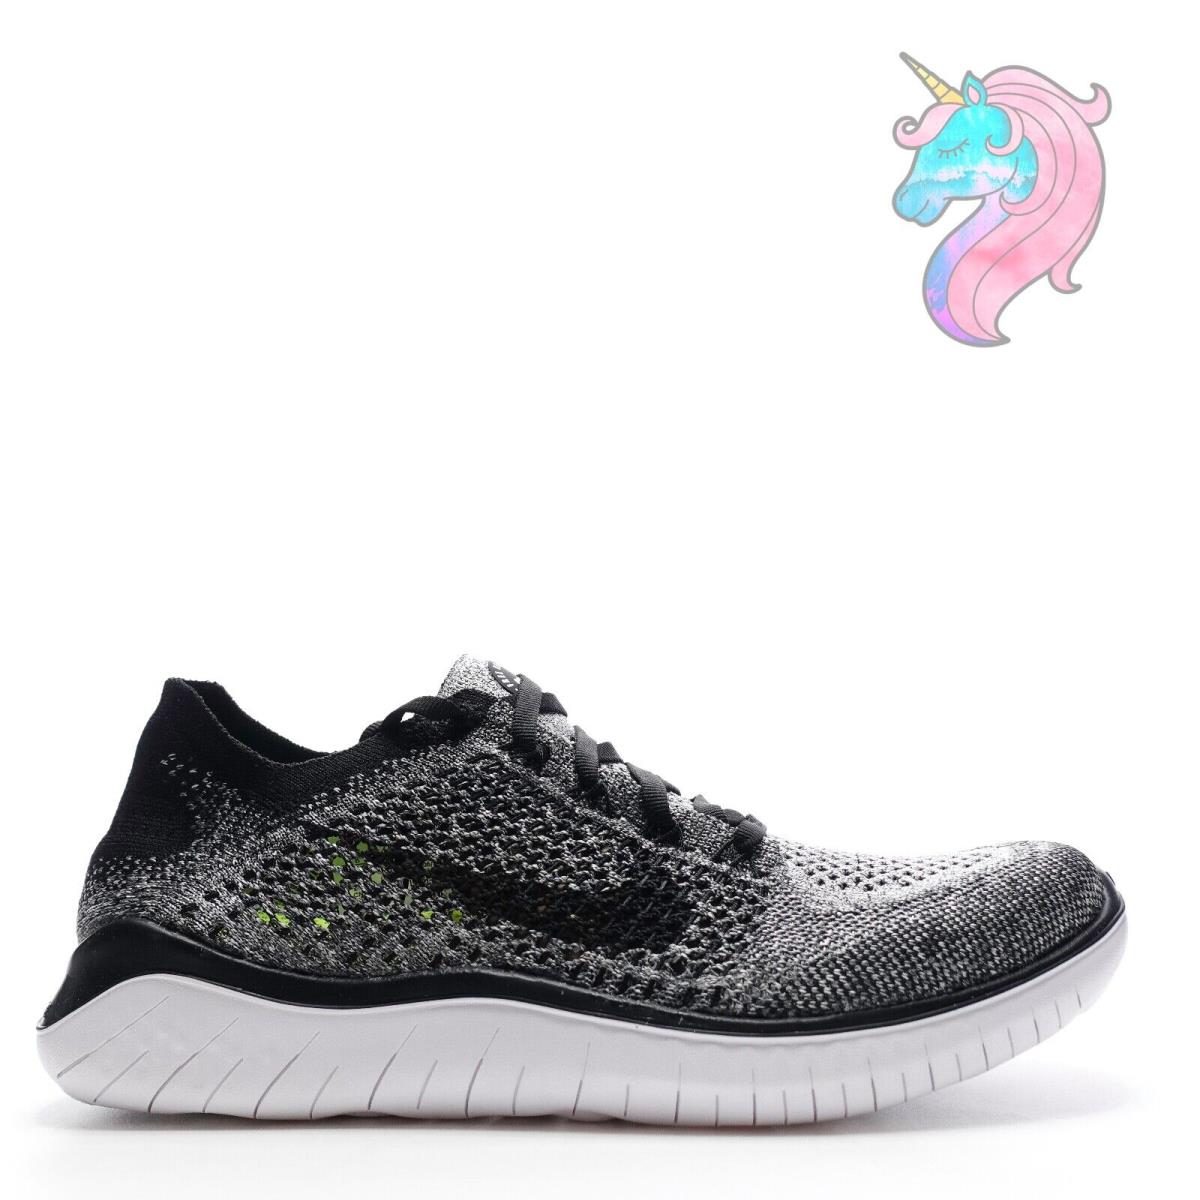 Nike Free RN Flyknit 2018 Running Shoes White Black 942839-101 Womens Size 8